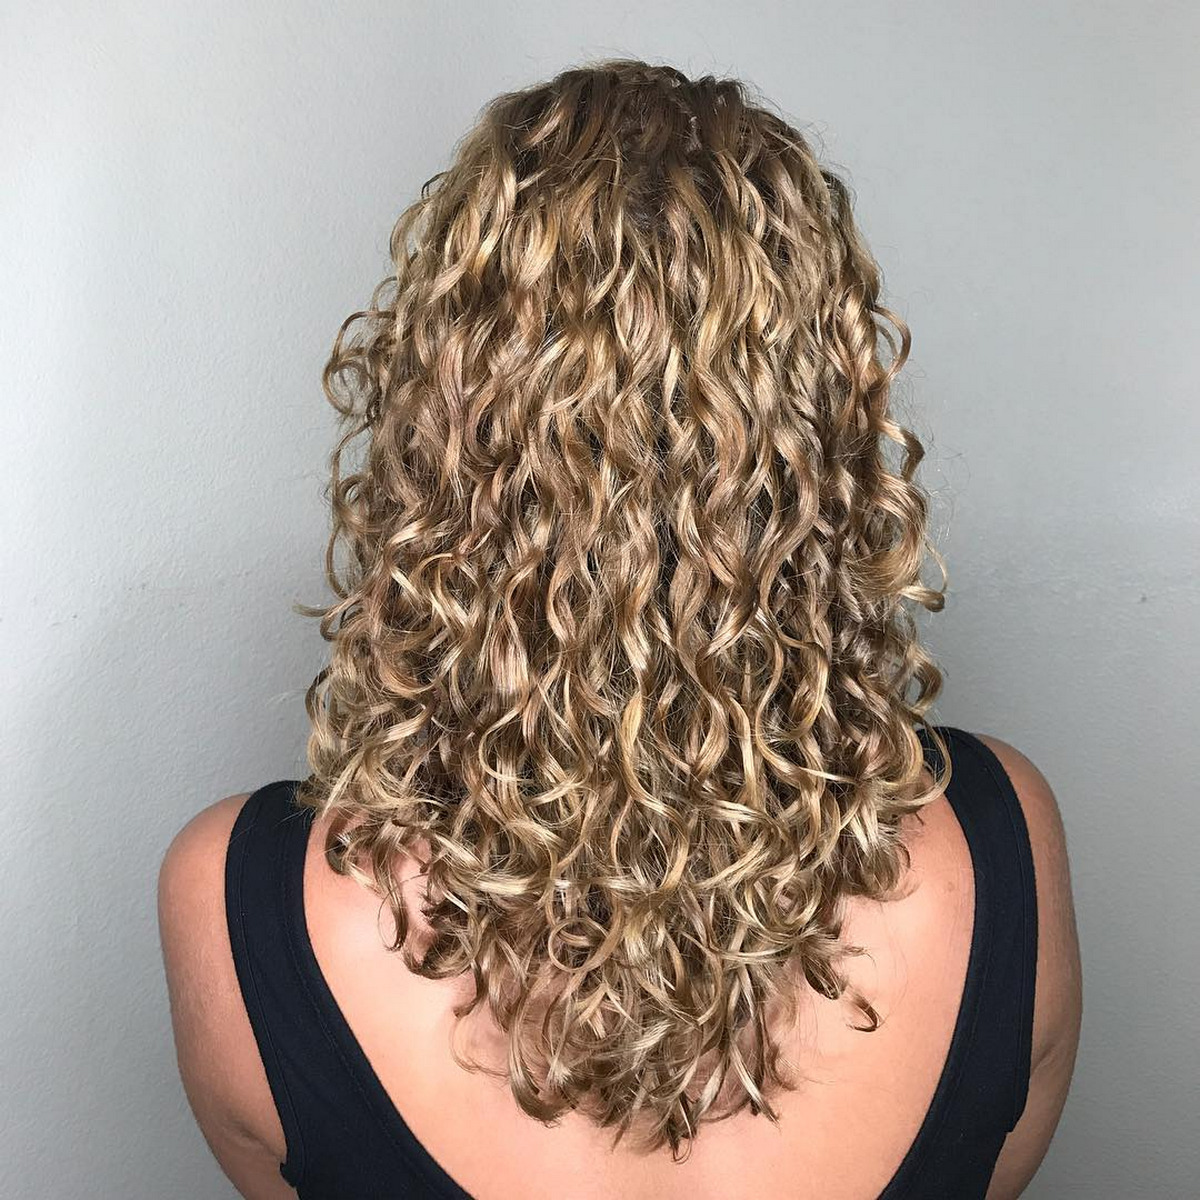 V-Cut Long Curly Blonde Hairstyle